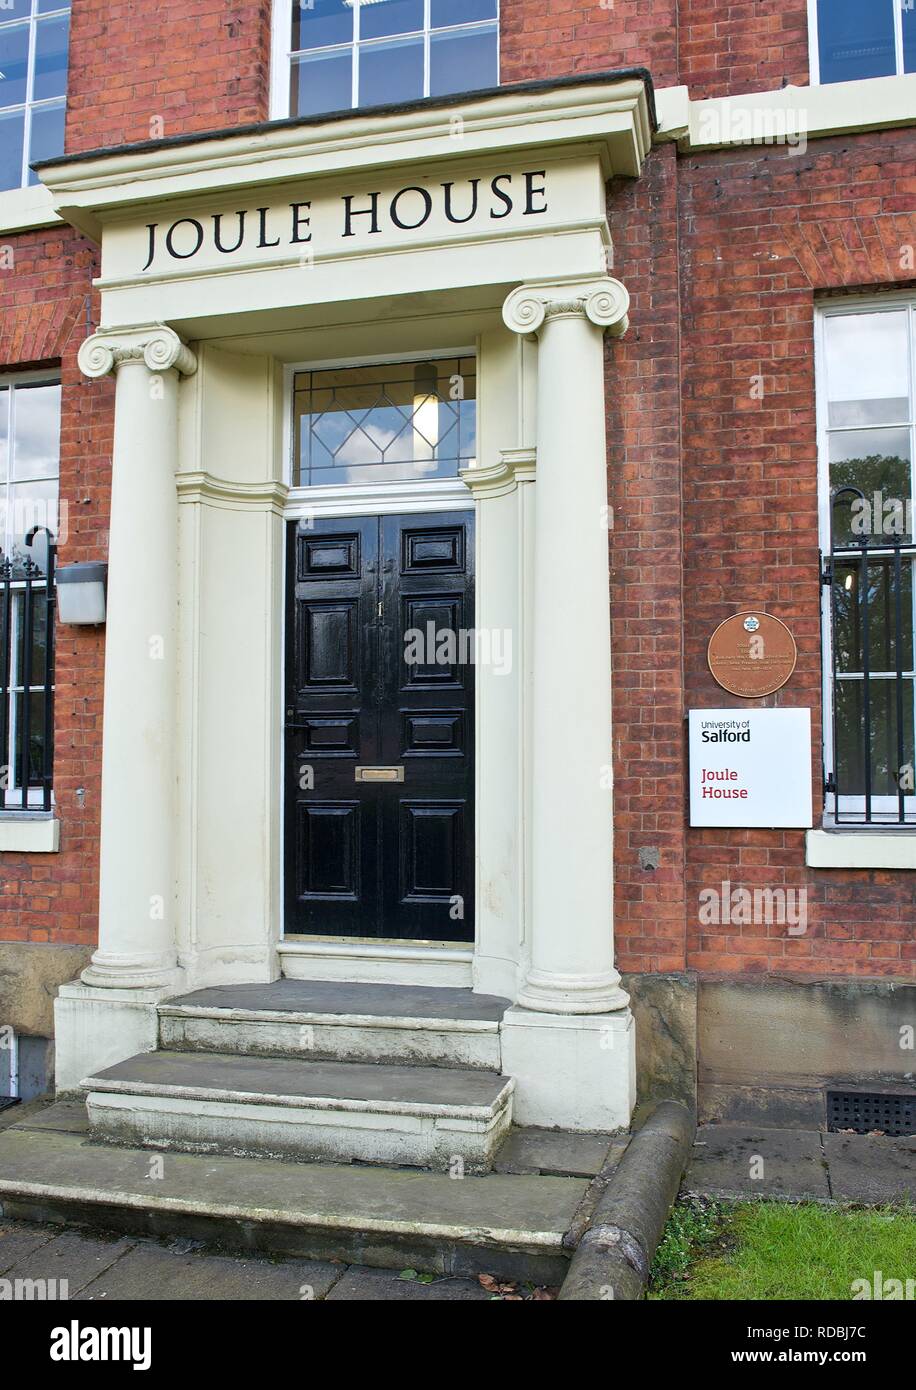 Joule House, Salford, Manchester Stock Photo